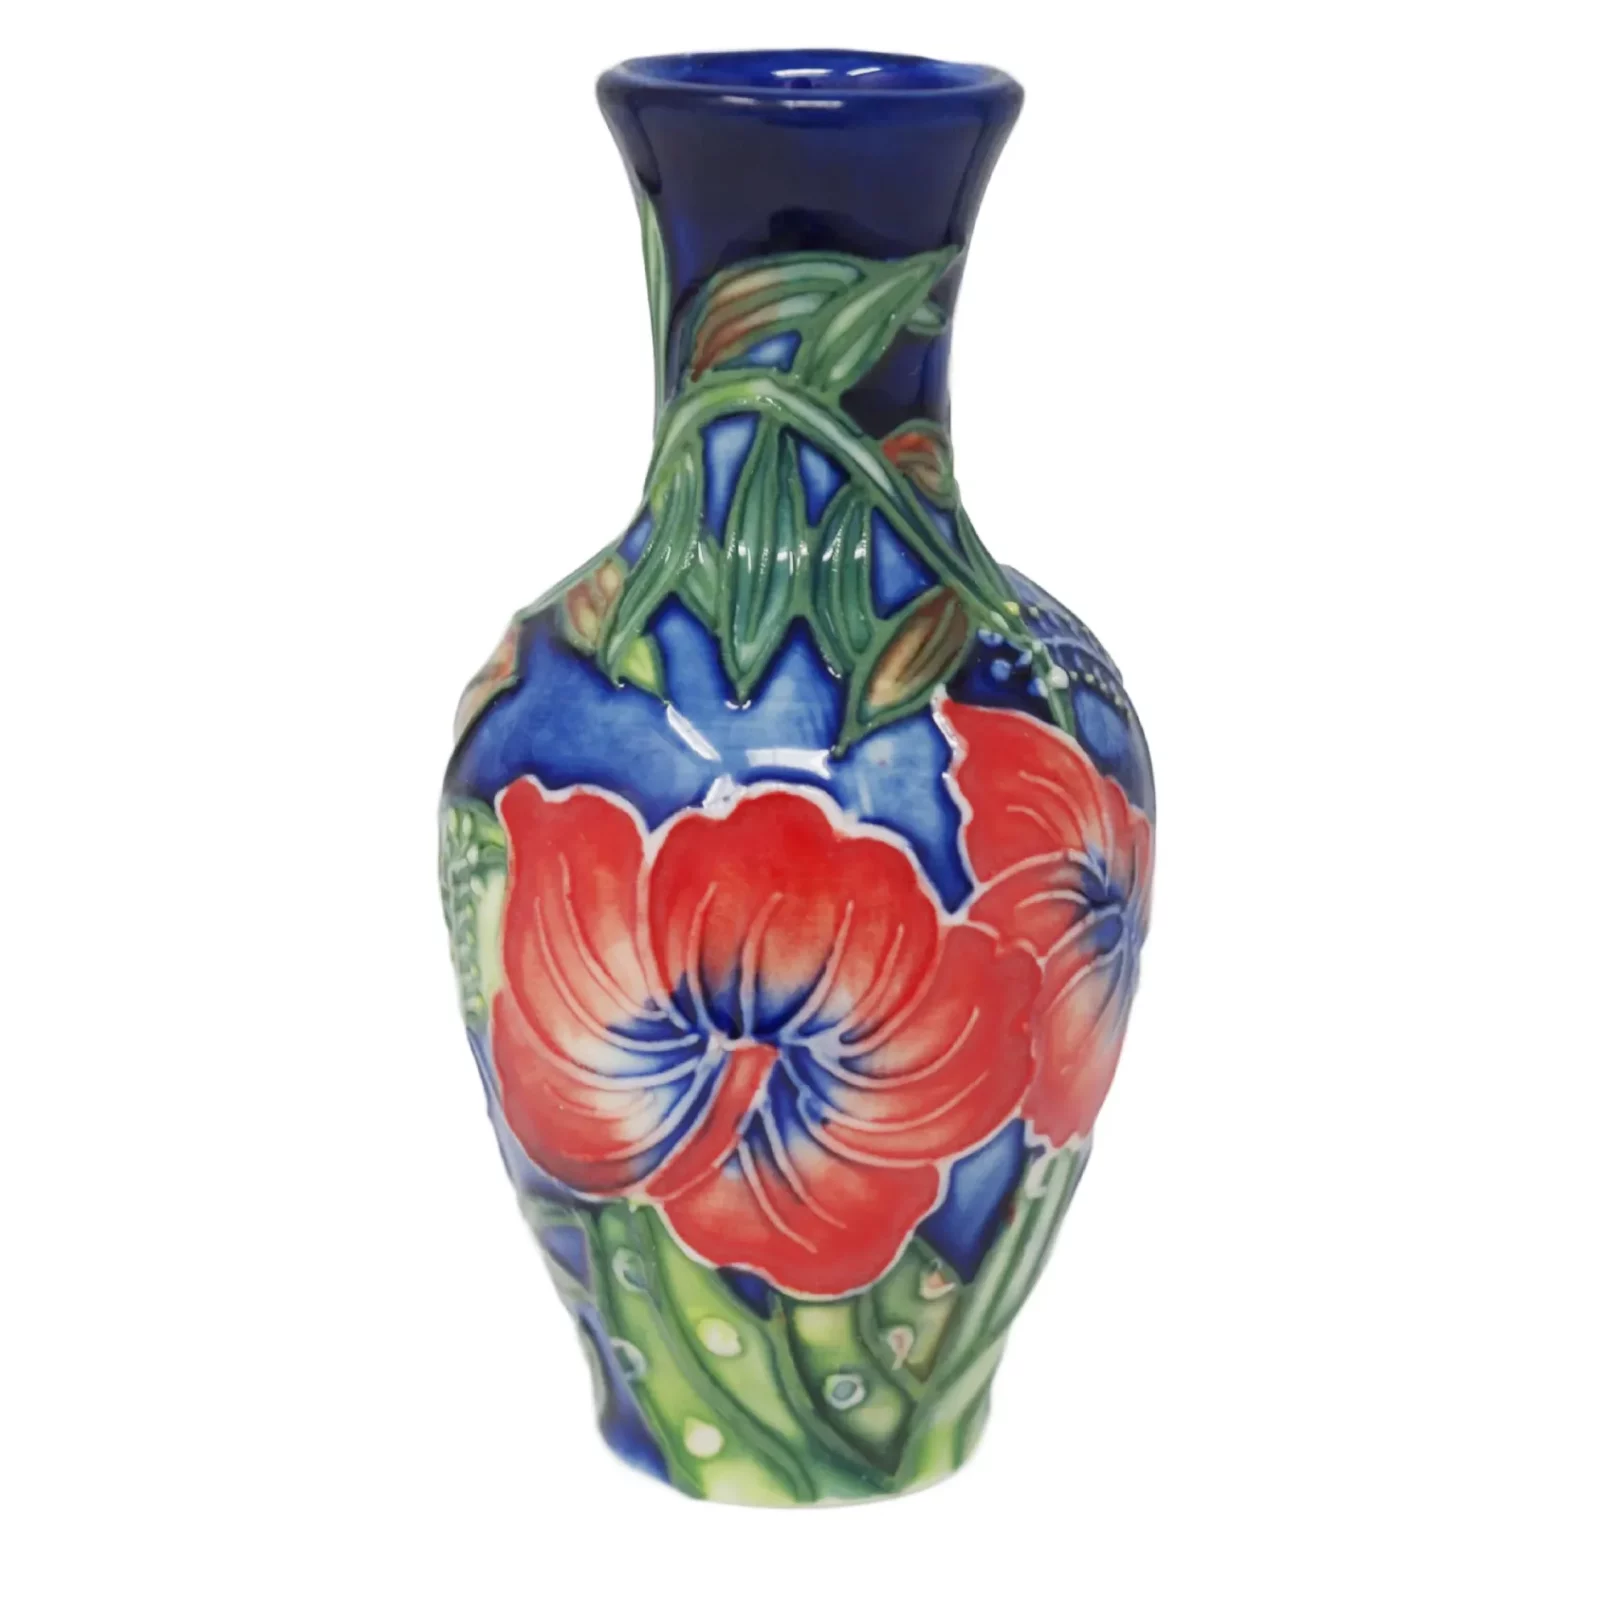 Stunning red hibiscus flower decoration and bold shades of blue contrast on this small vase